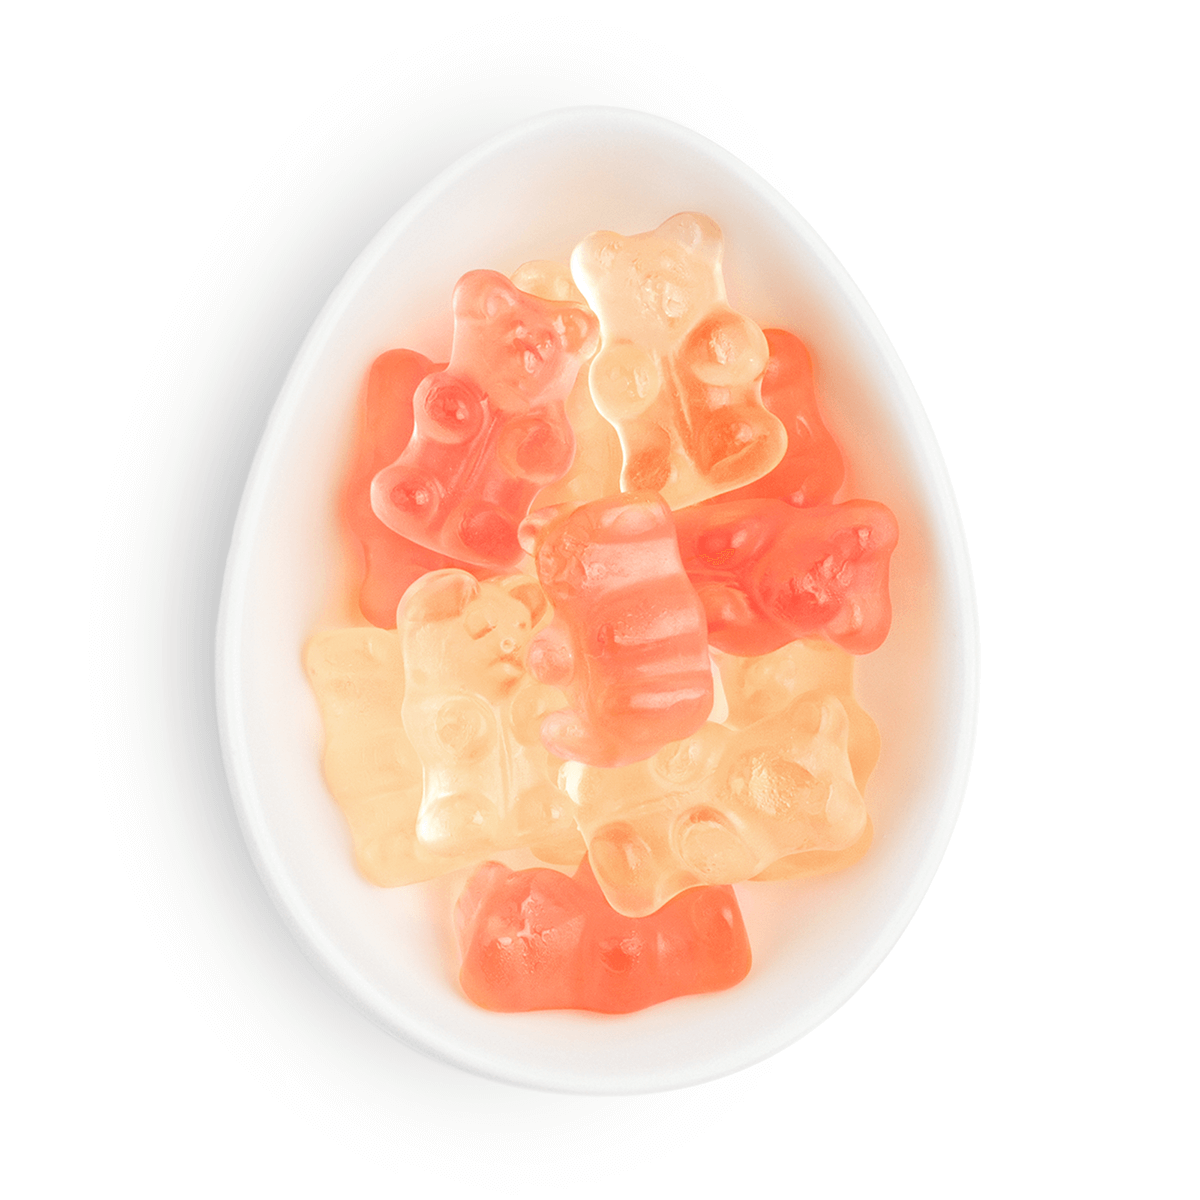 Small white ceramic dish filled with pink and yellow gummy bears.